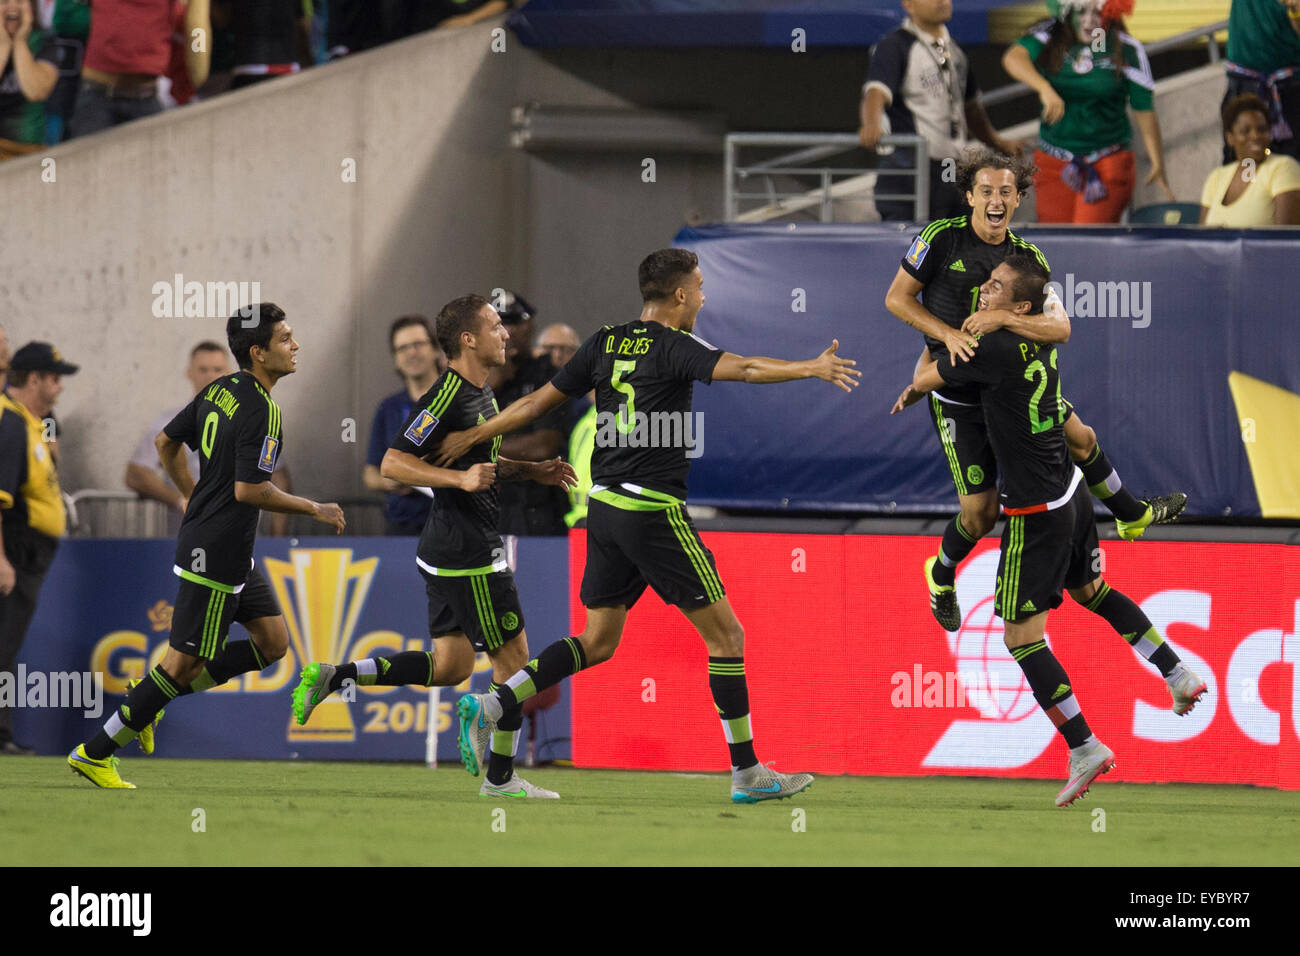 Philadelphia, Pennsylvania, USA. 26th July, 2015. Mexico midfielder Andres Guardado (18) reacts to his goal as his teammates celebrate during the CONCACAF Gold Cup 2015 Final match between Jamaica and Mexico at Lincoln Financial Field in Philadelphia, Pennsylvania. Christopher Szagola/CSM/Alamy Live News Stock Photo